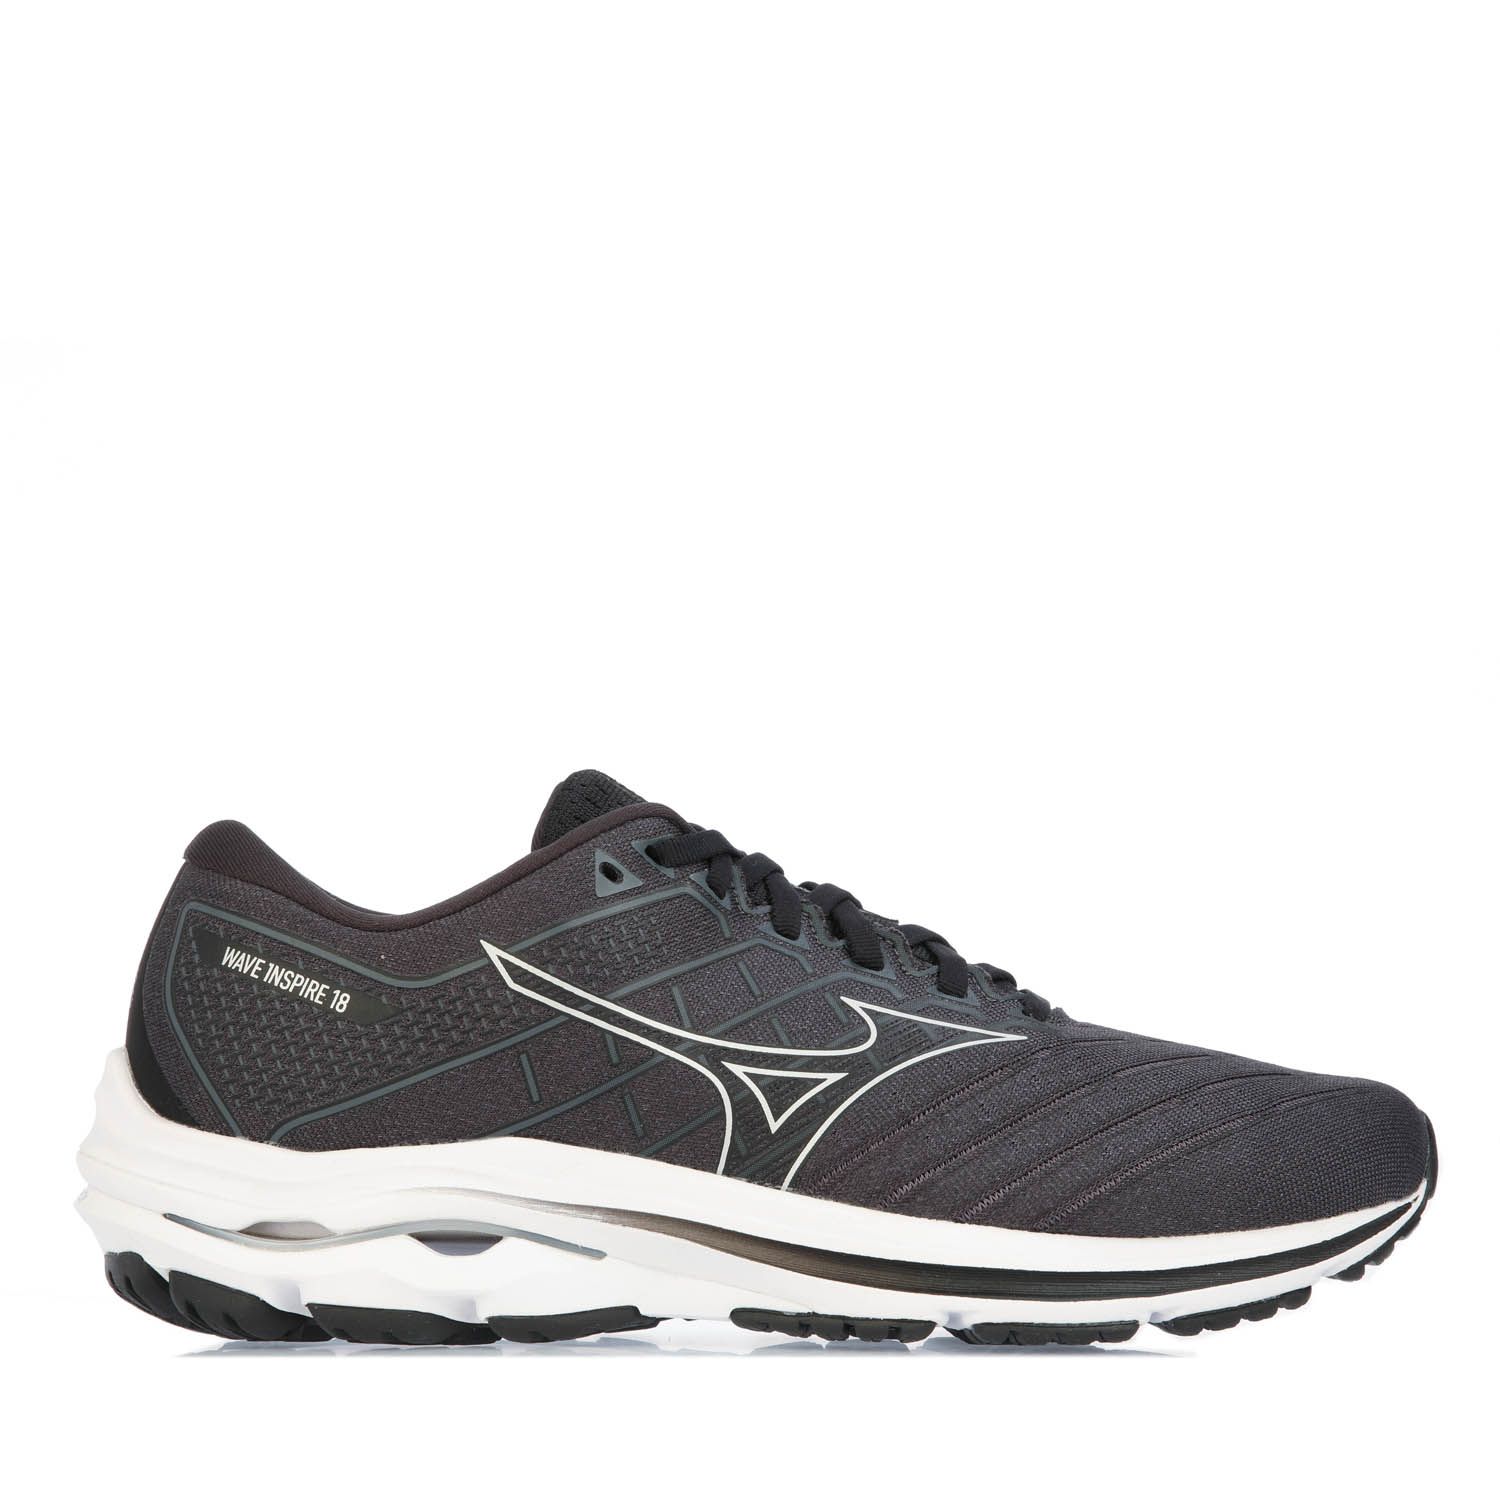 Mens Wave Inspire Running Shoes